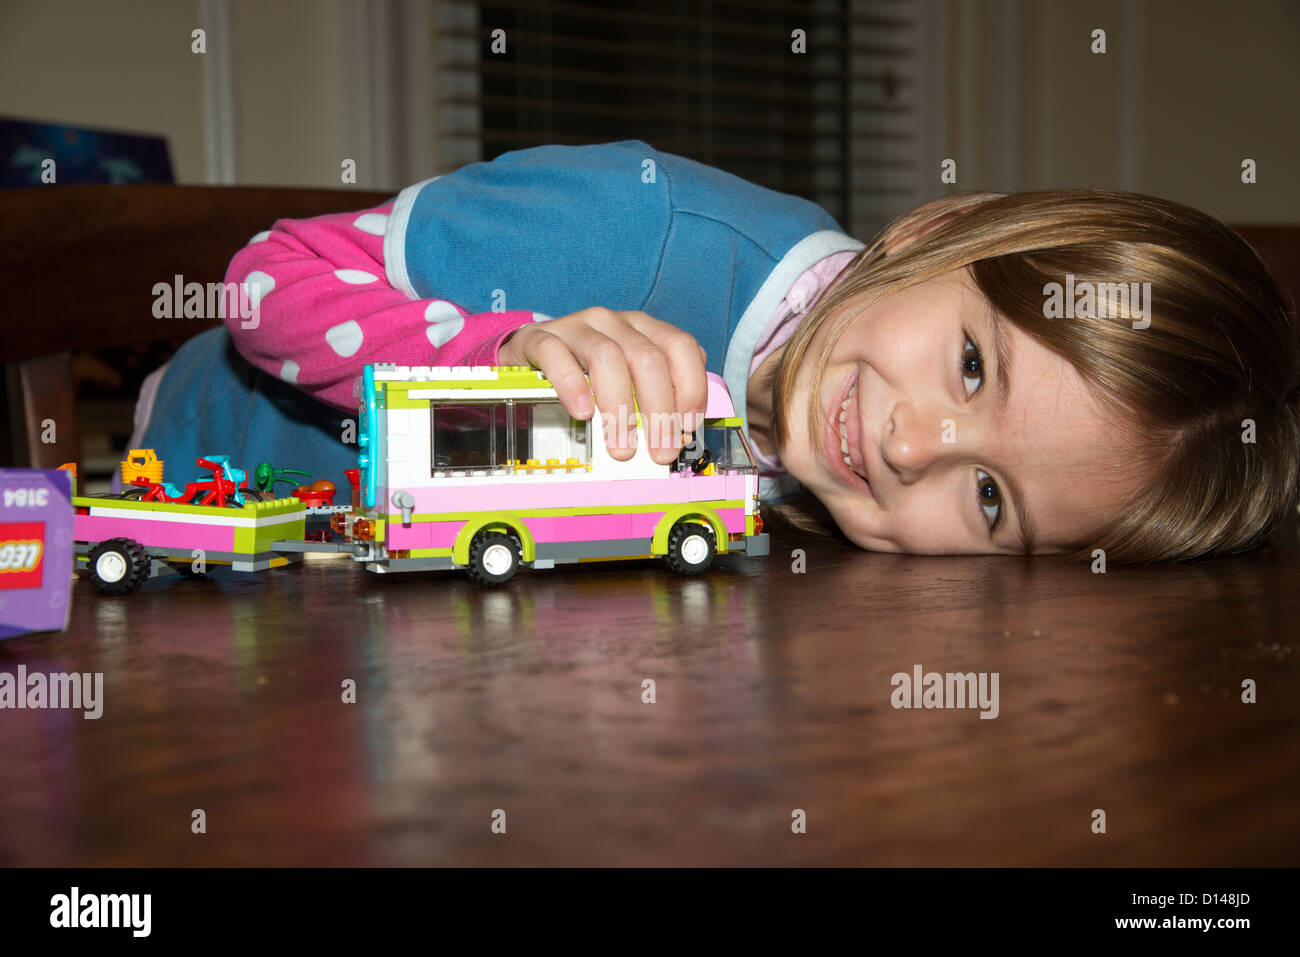 Child playing on a table with a lego campervan she has built Stock Photo